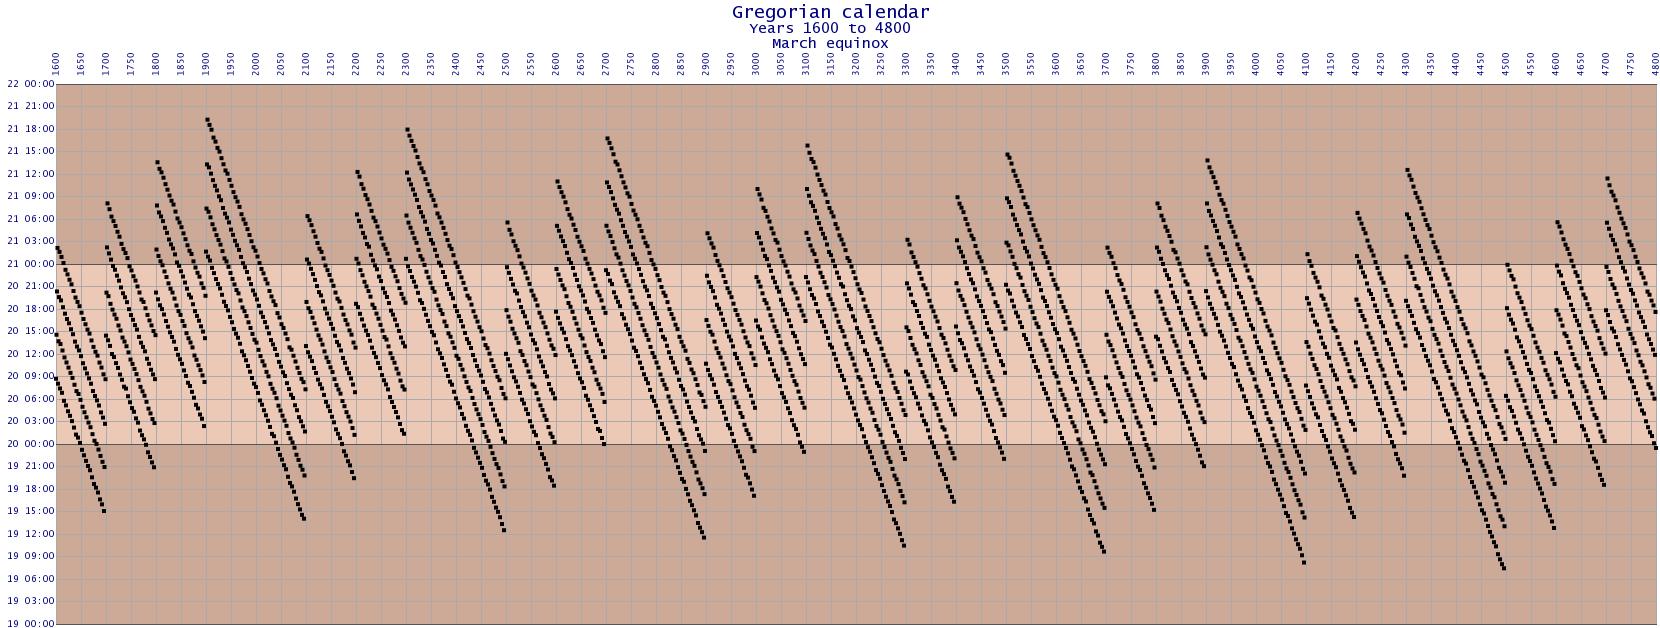 3200 years of the Gregorian calendar, showing errors over time